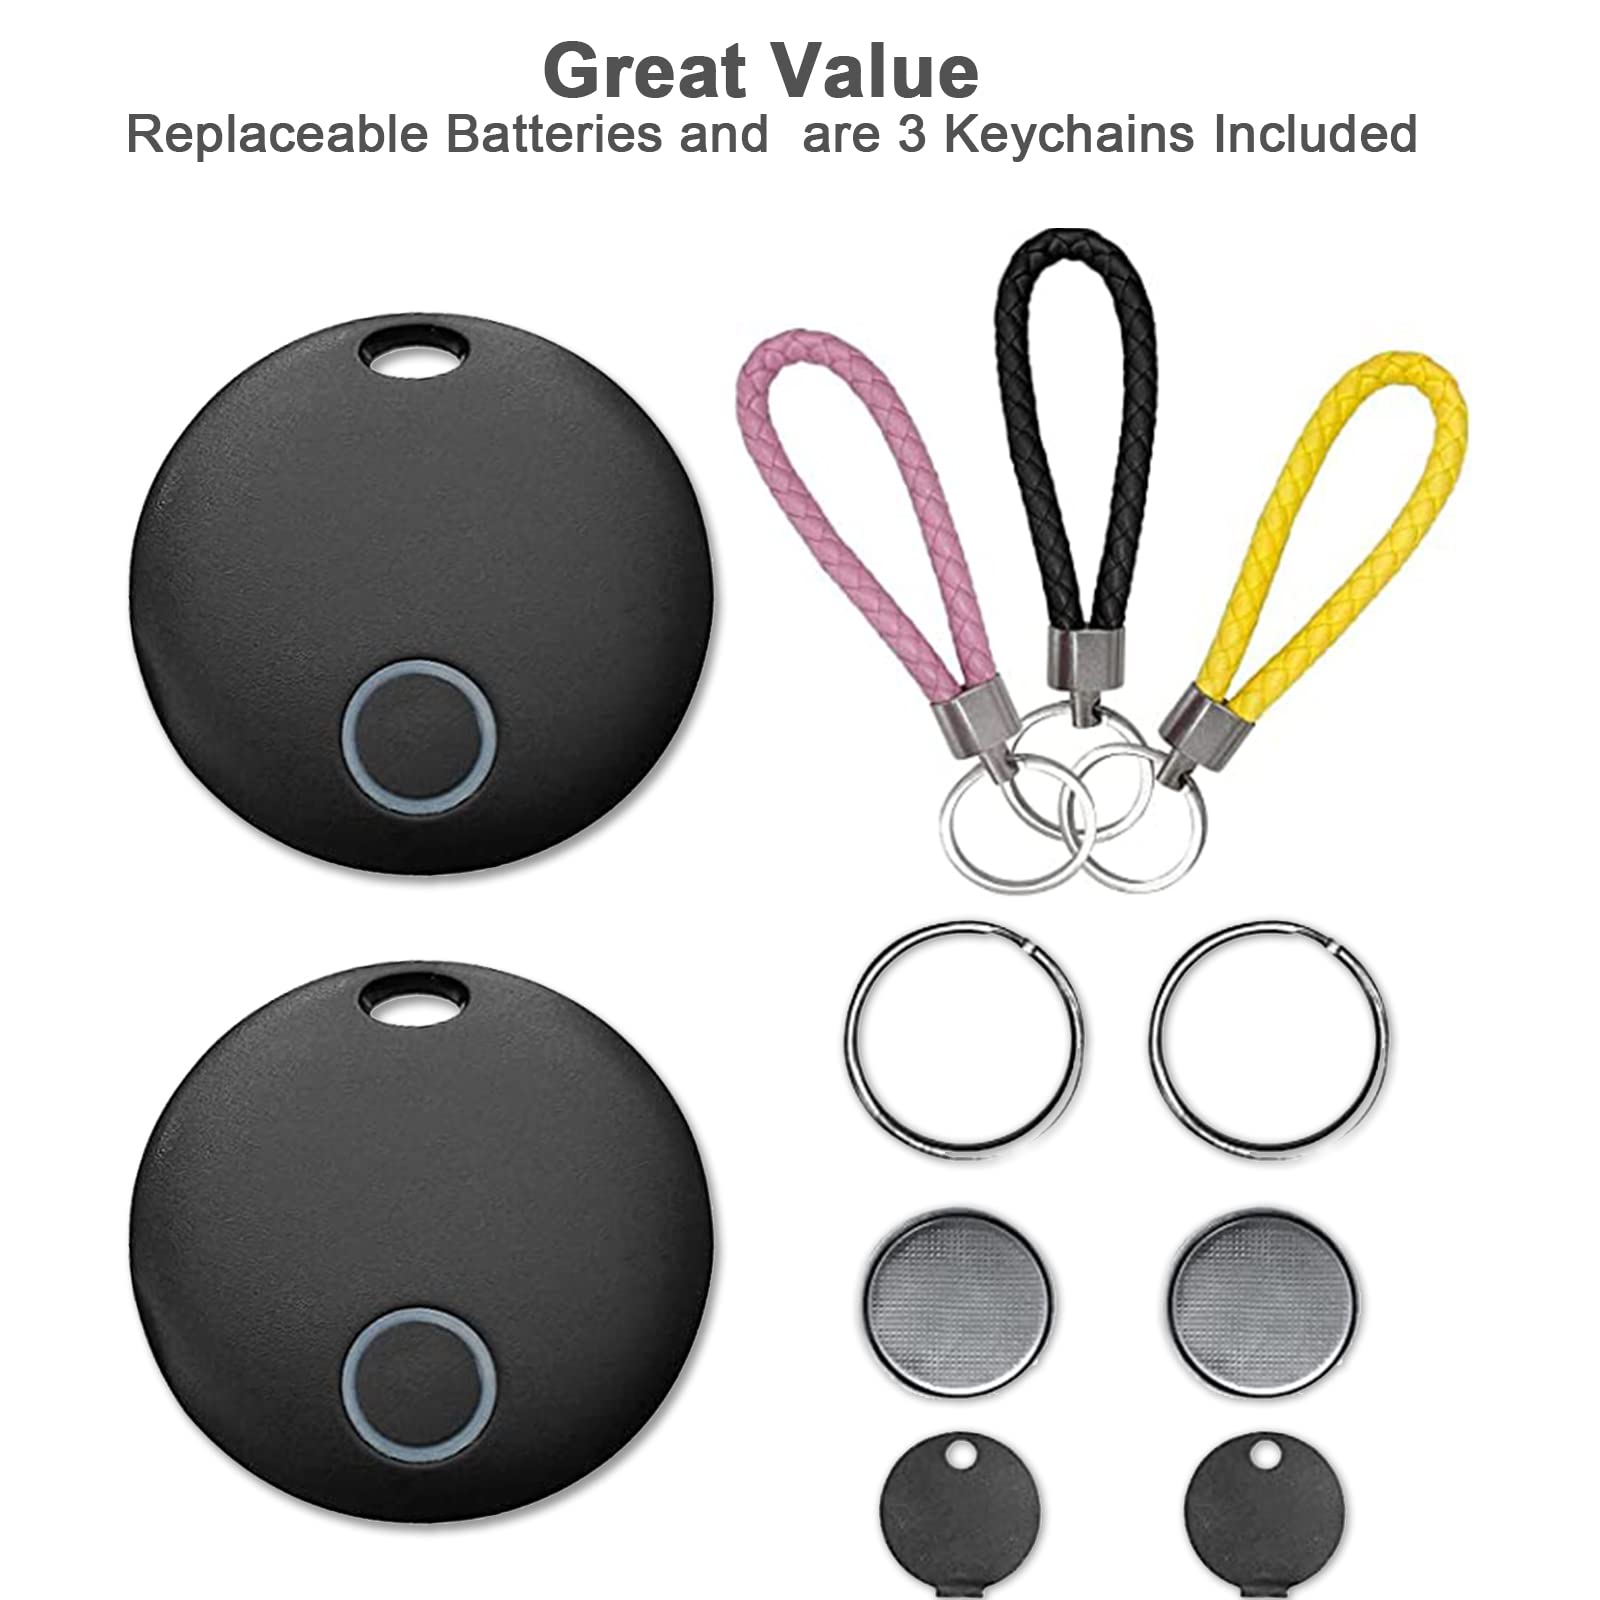 2 Pack Key Finder with App for Phones Bluetooth Smart Tracker with 3 Keychains and Item Locator for Keys/Phone/Wallet, 2 Replaceable Battery Waterproof Anti-Lost Tracking Device